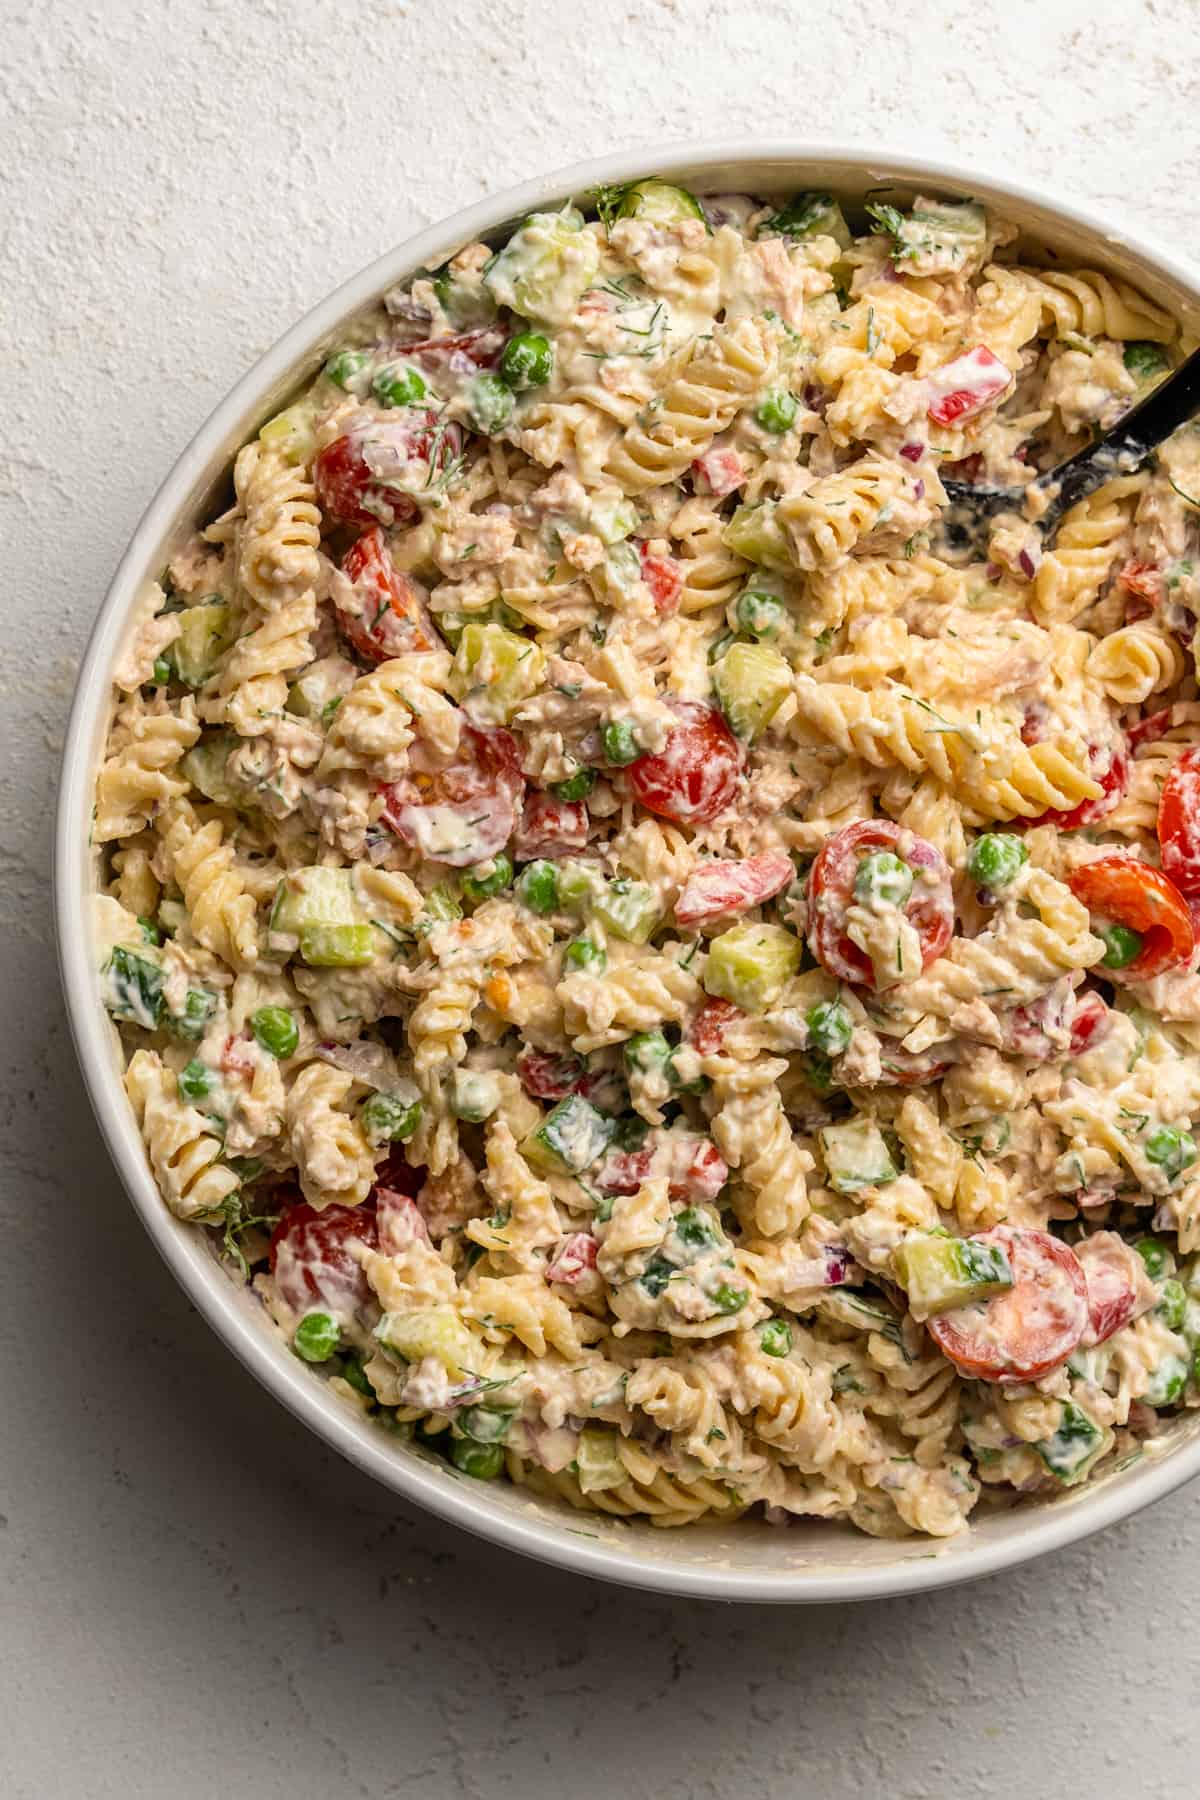 Creamy pasta salad in a large mixing bowl full of fresh vegetables and tuna.